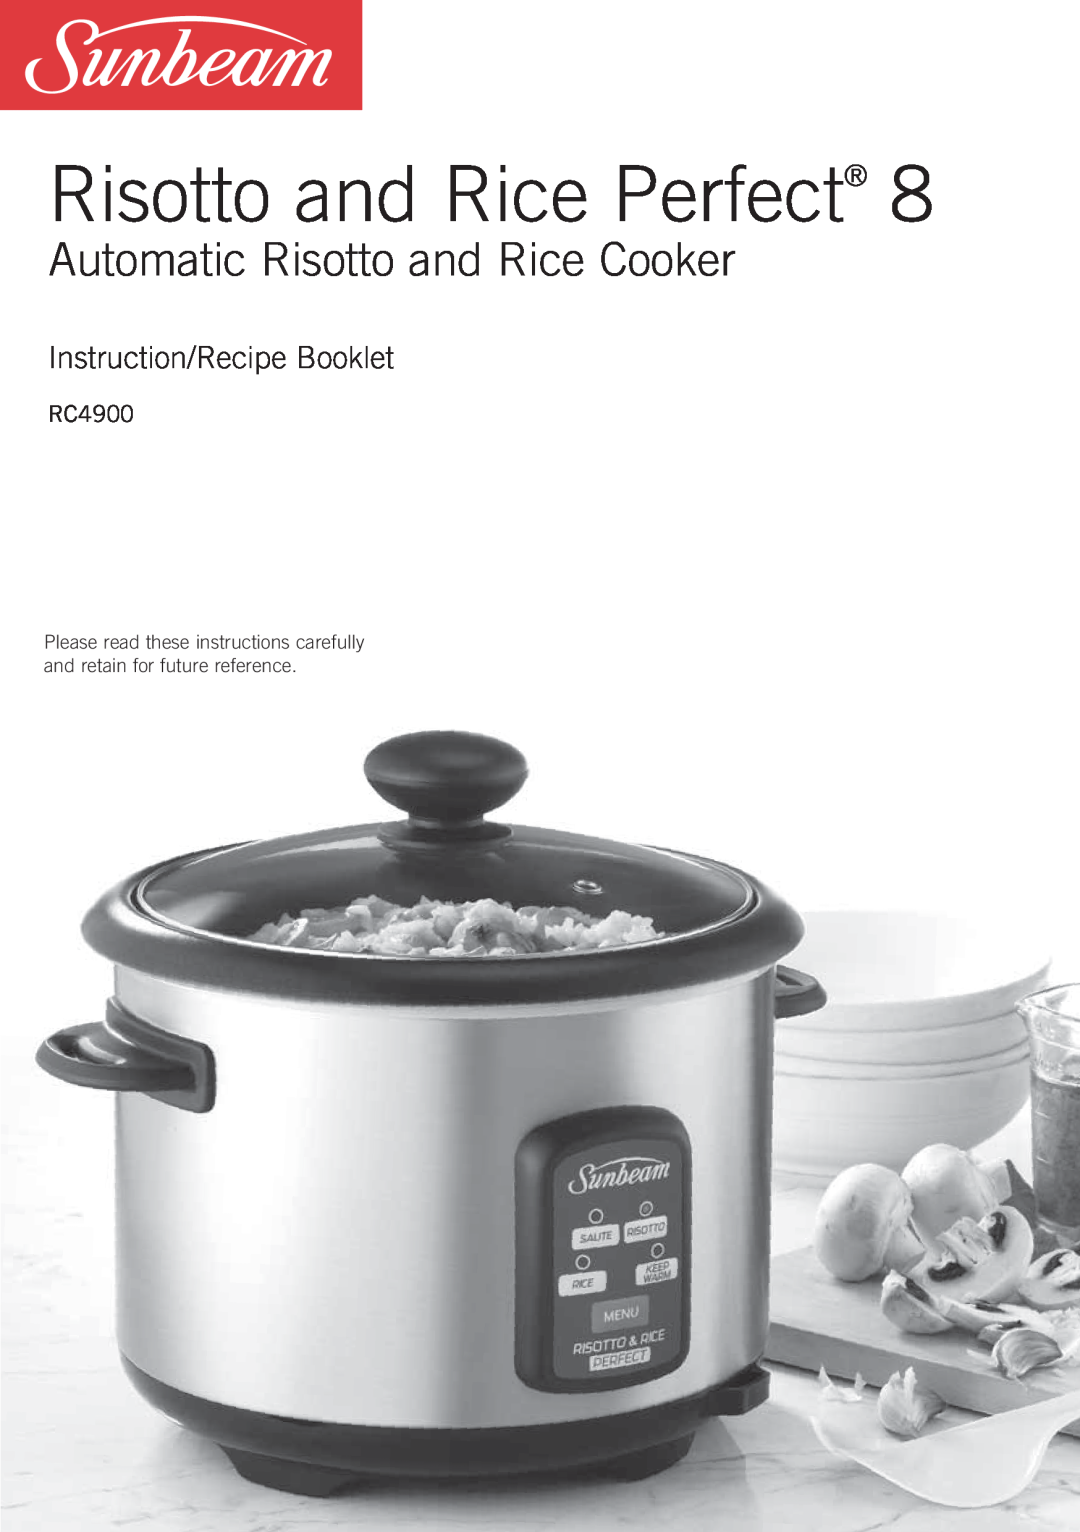 Sunbeam RC4900 manual Instruction/Recipe Booklet, Risotto and Rice Perfect, Automatic Risotto and Rice Cooker 